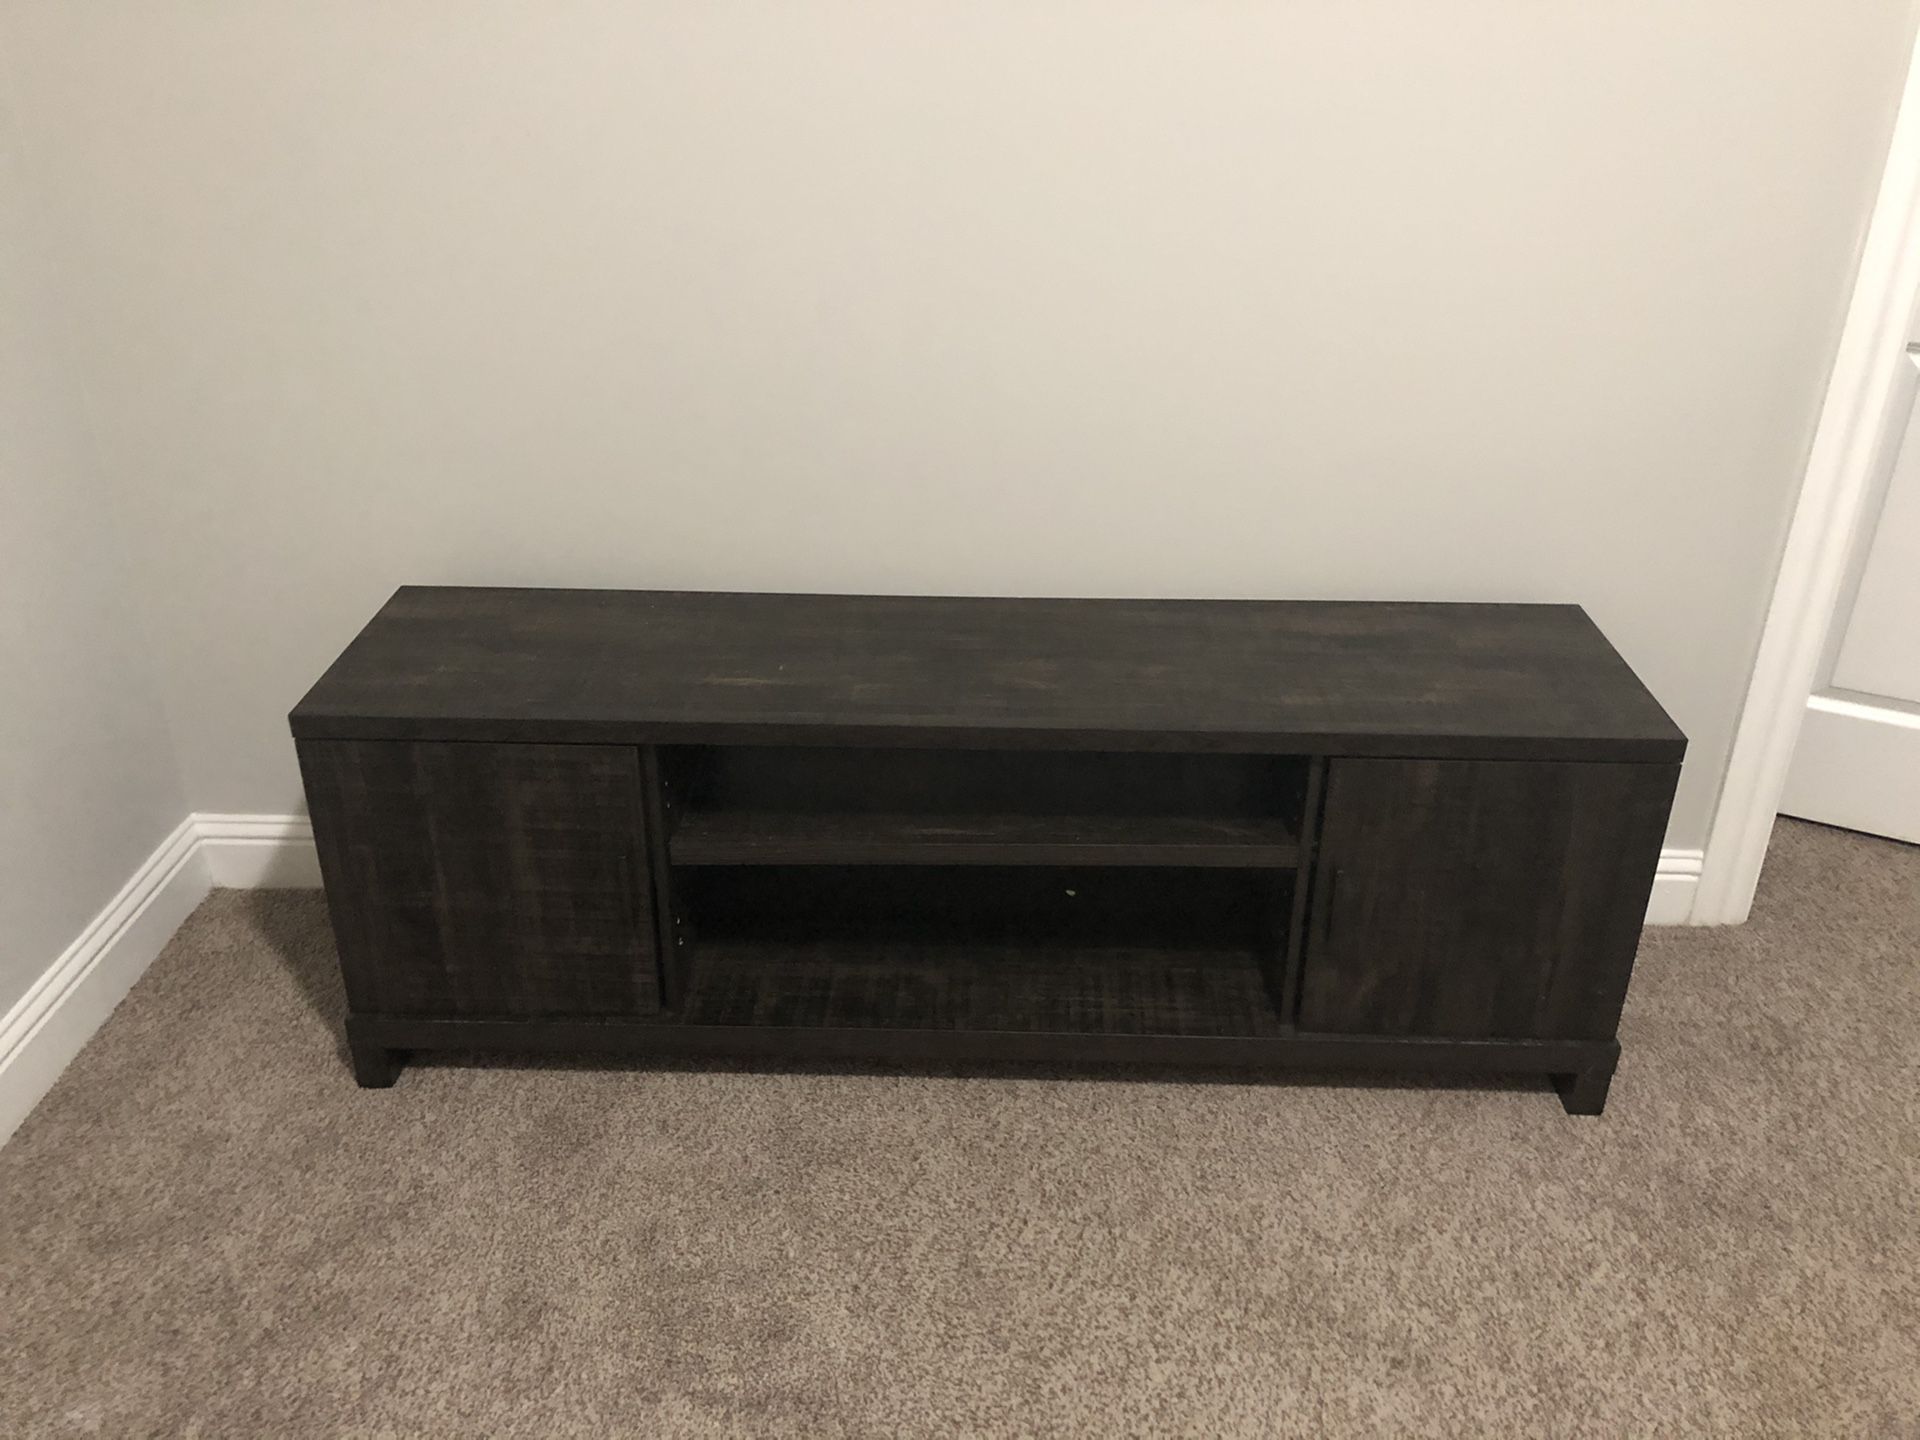 TV stand with shelves and two storage compartments